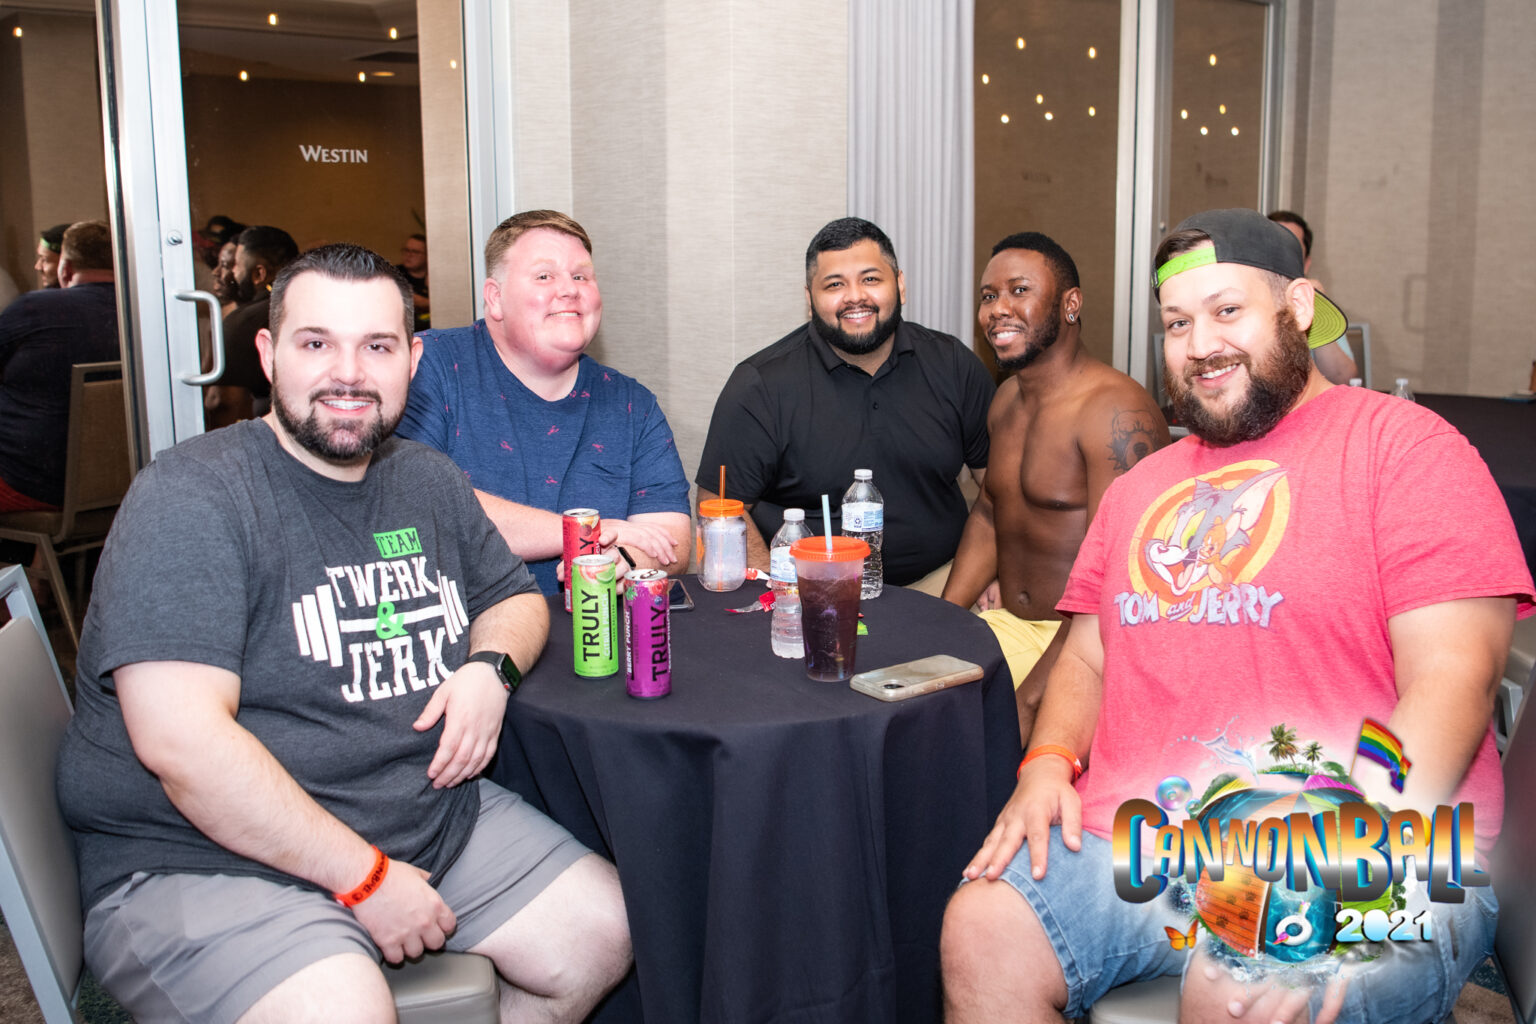 Take a look at these hot photos from Cannonball 2021! Bear World Magazine